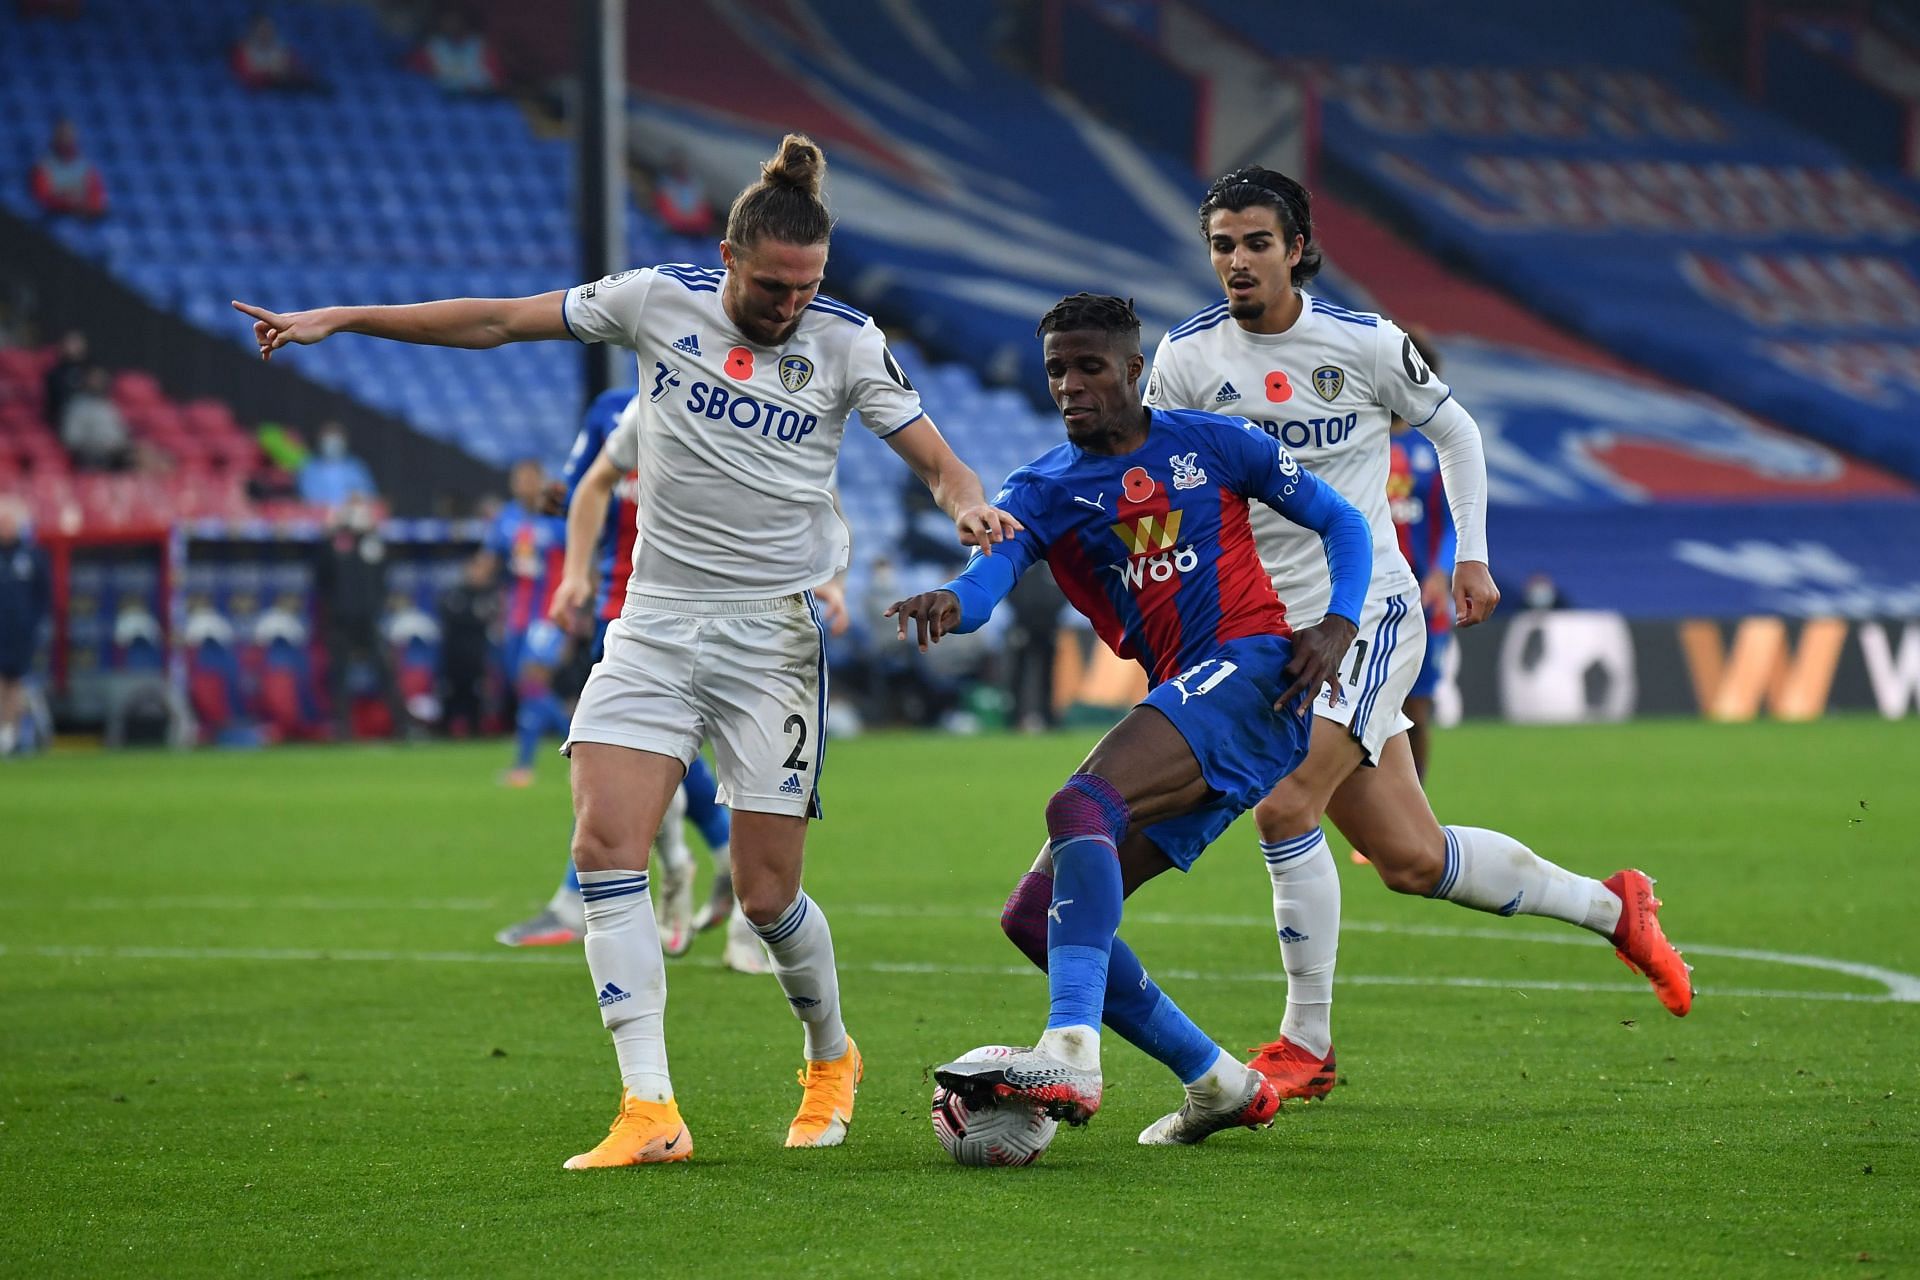 Crystal Palace take on Leeds United this weekend